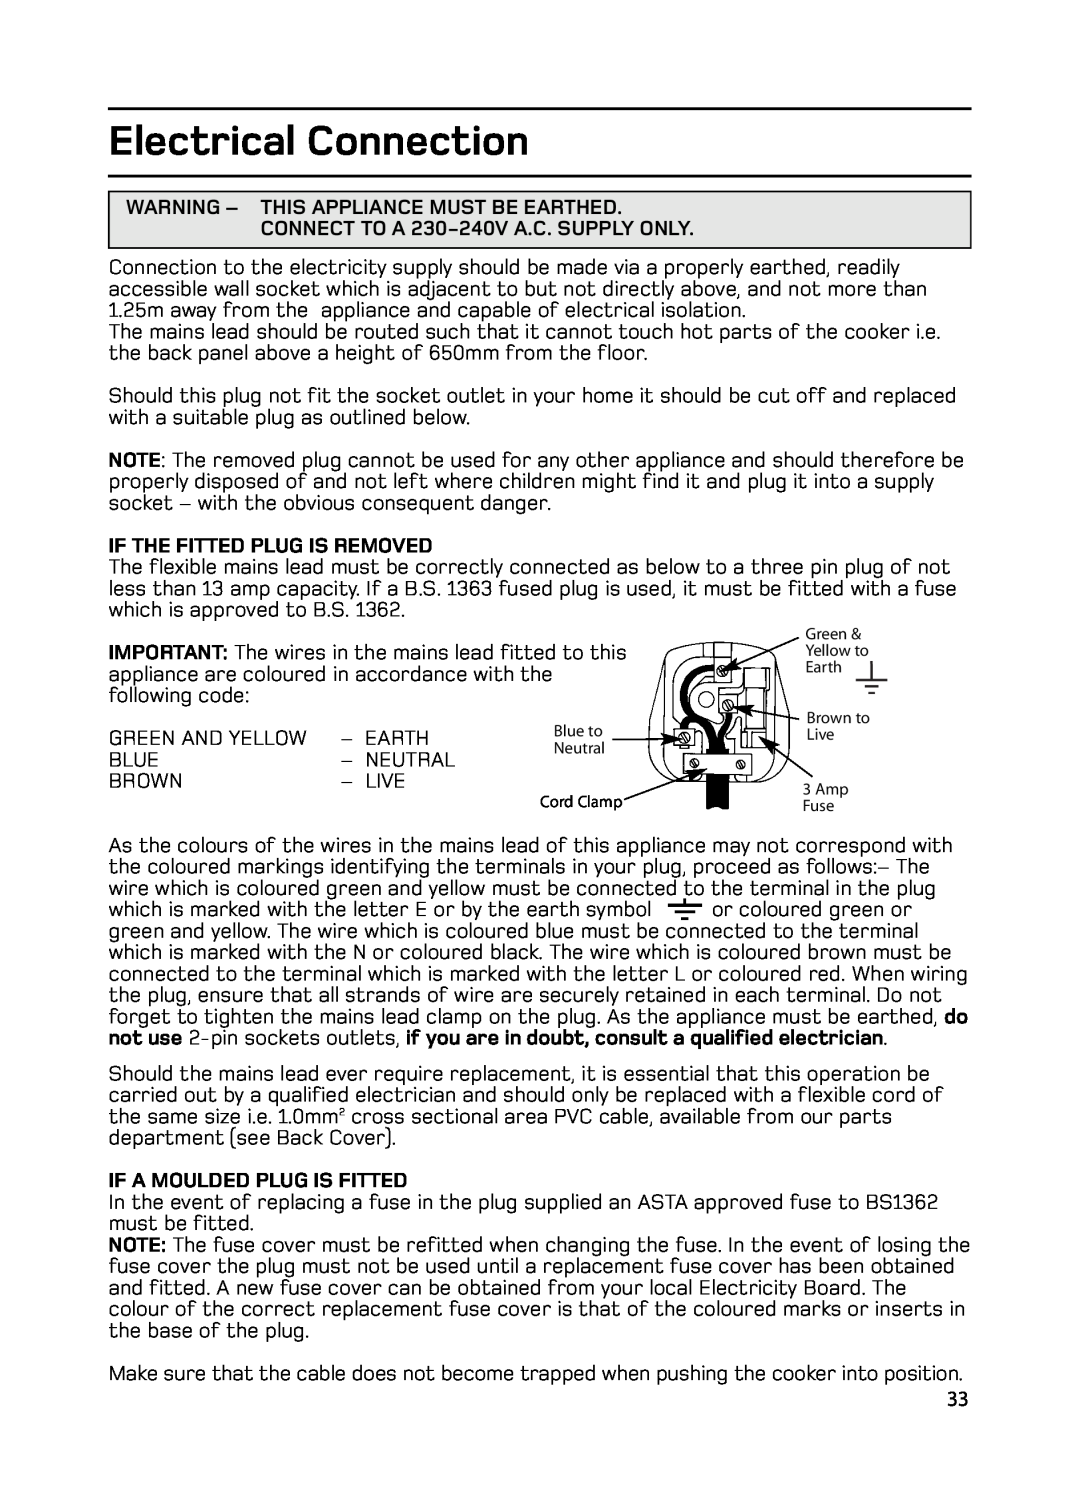 Hotpoint GW74 manual Electrical Connection, Warning - This Appliance Must Be Earthed, CONNECT TO A 230-240VA.C. SUPPLY ONLY 